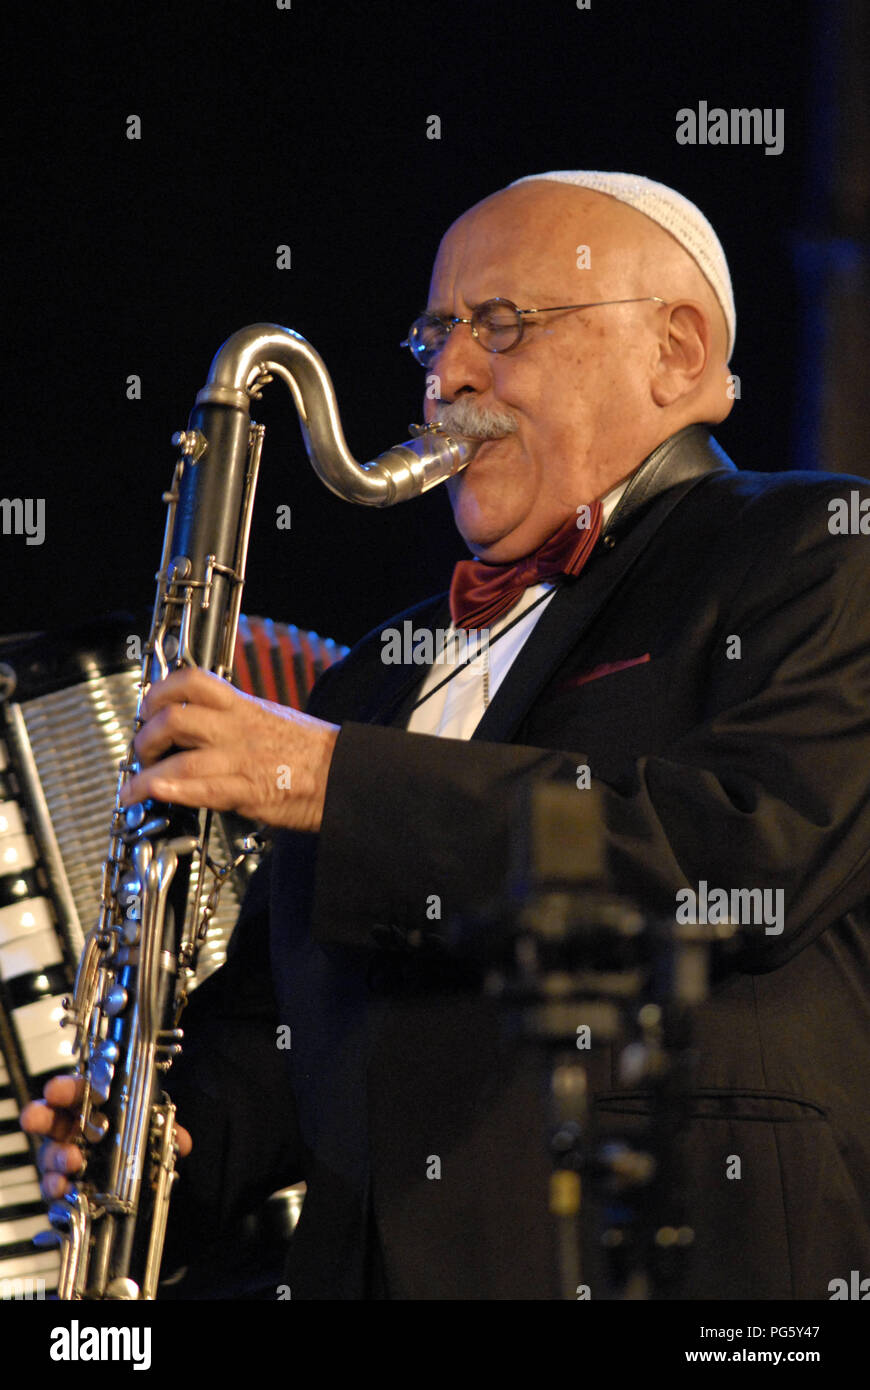 Berlin, DEU, 17.09.2011: Portrait Giora Feidman (Argentina / Germany, born  25 March 1936 in Buenos Aires) and clarinetist Instrumental Soloist of  klezmer music, on his 65th anniversary concert Stage and 75th anniversary